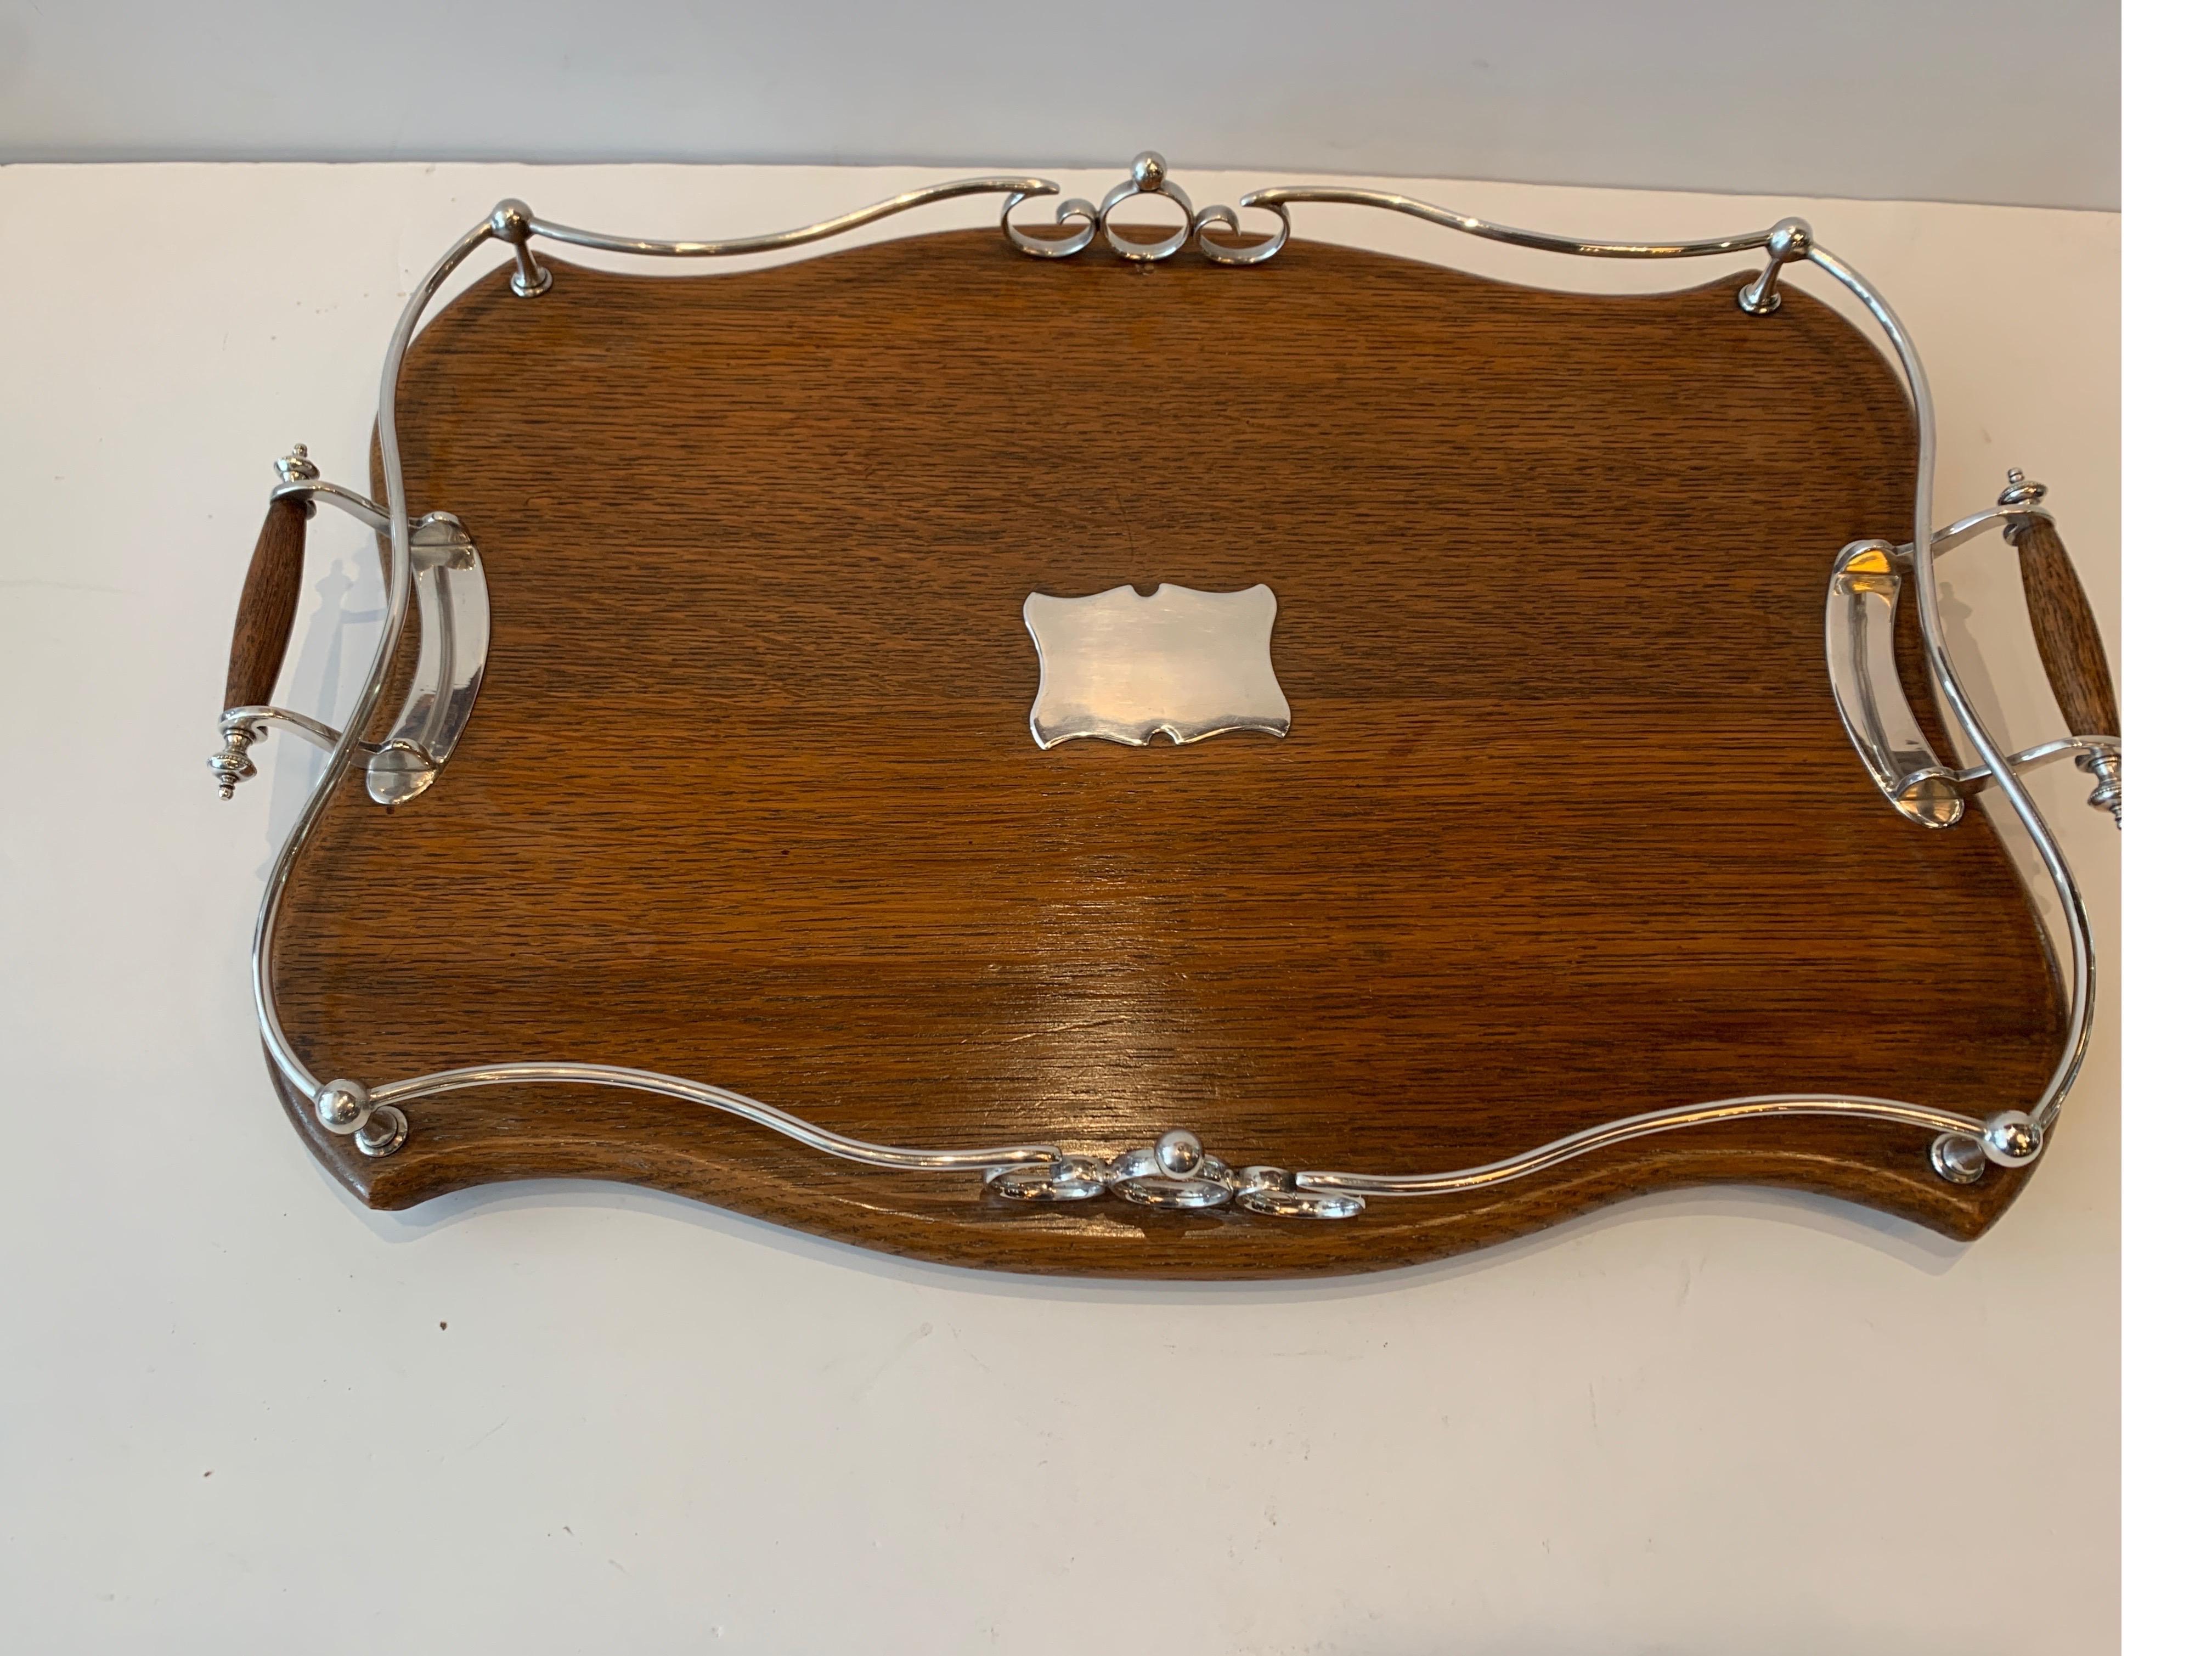 Early 20th Century English Silver-Plate & Solid Oak Gallery Handled Serving Tray For Sale 1